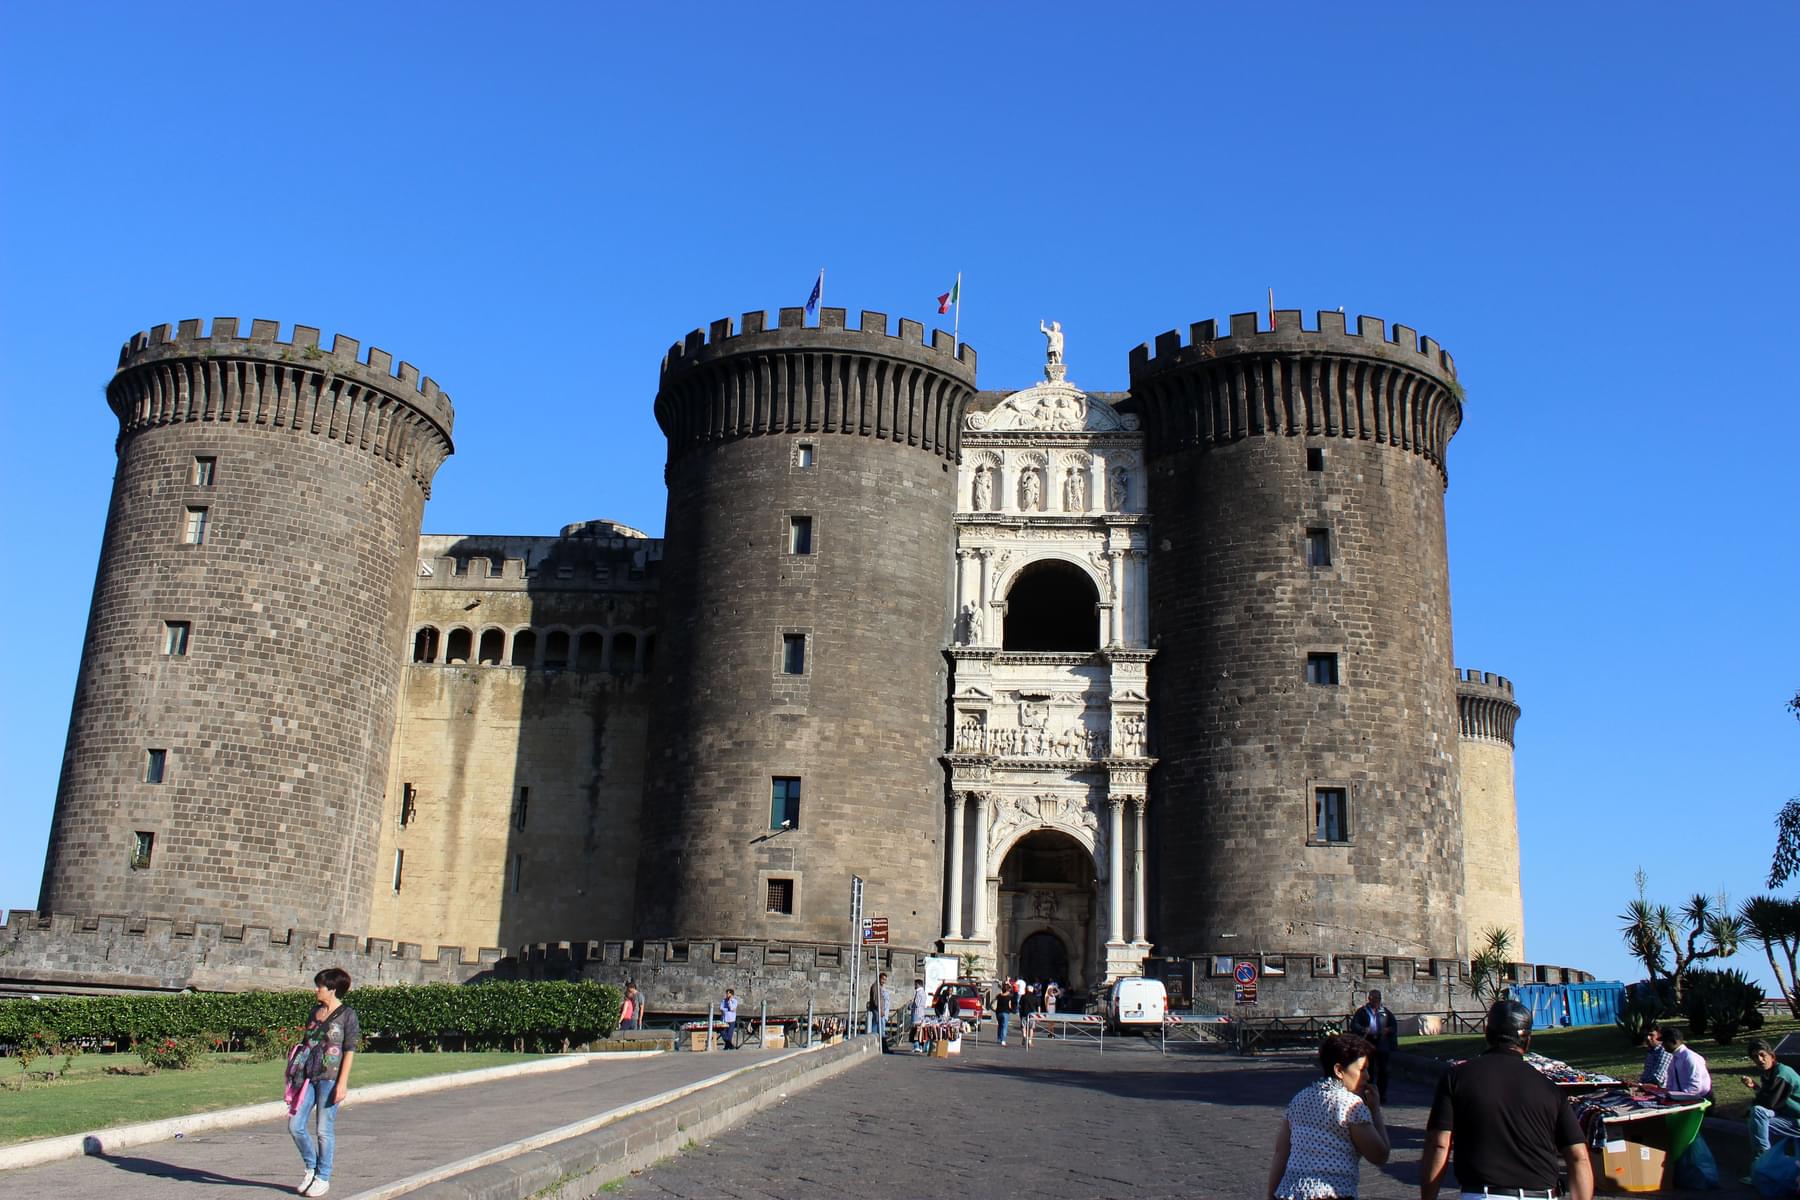 Tips to Visit Castel Nuovo